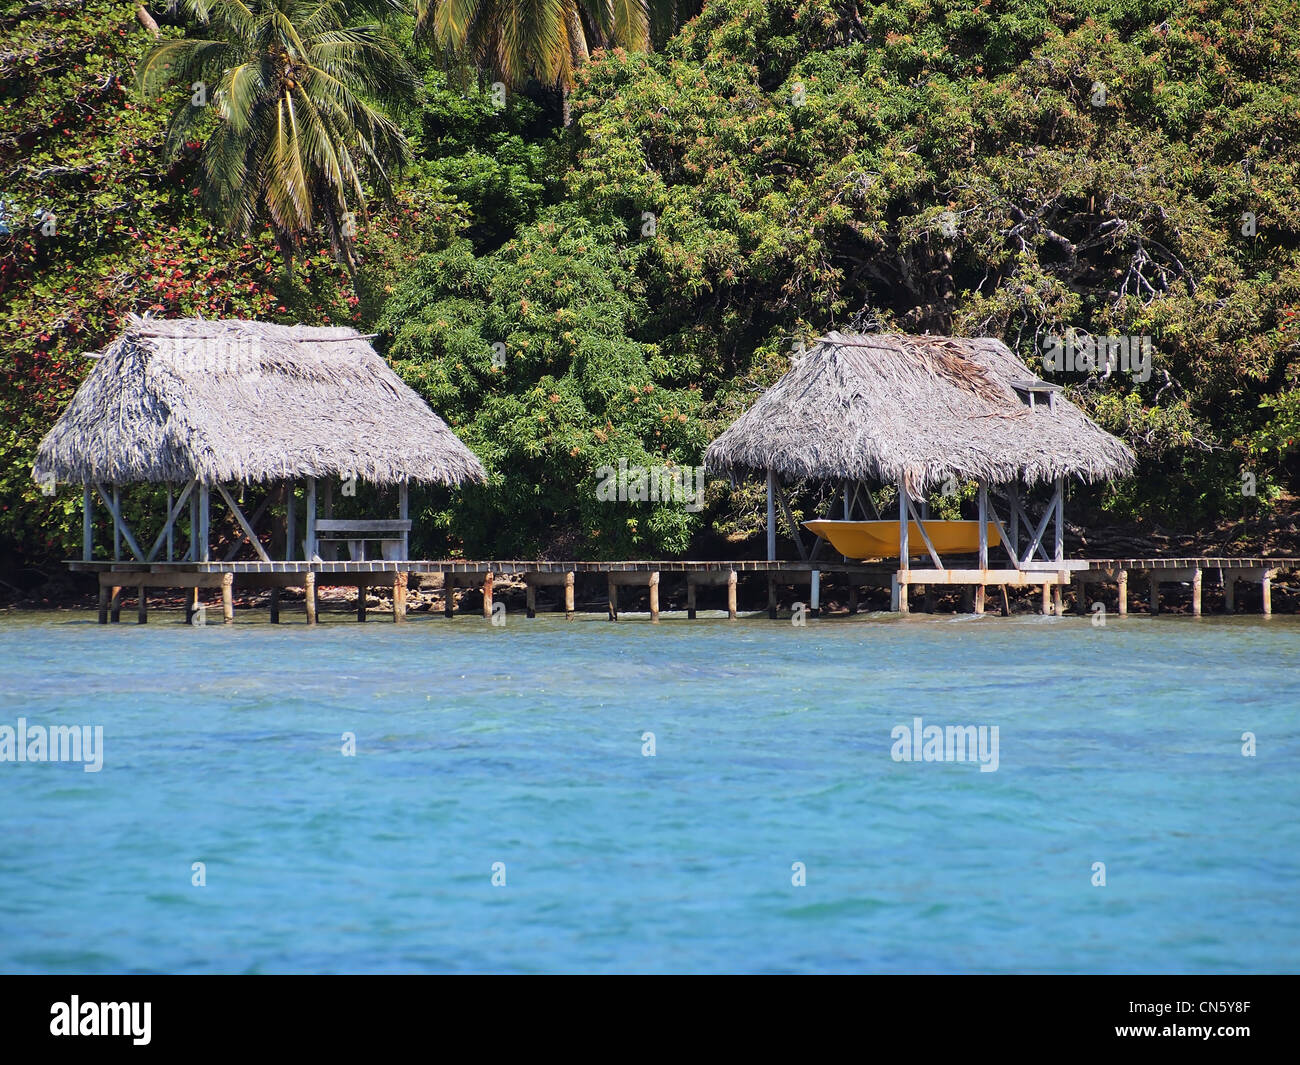 Boathouse and palapa over the sea with luxuriant tropical vegetation in the background Stock Photo